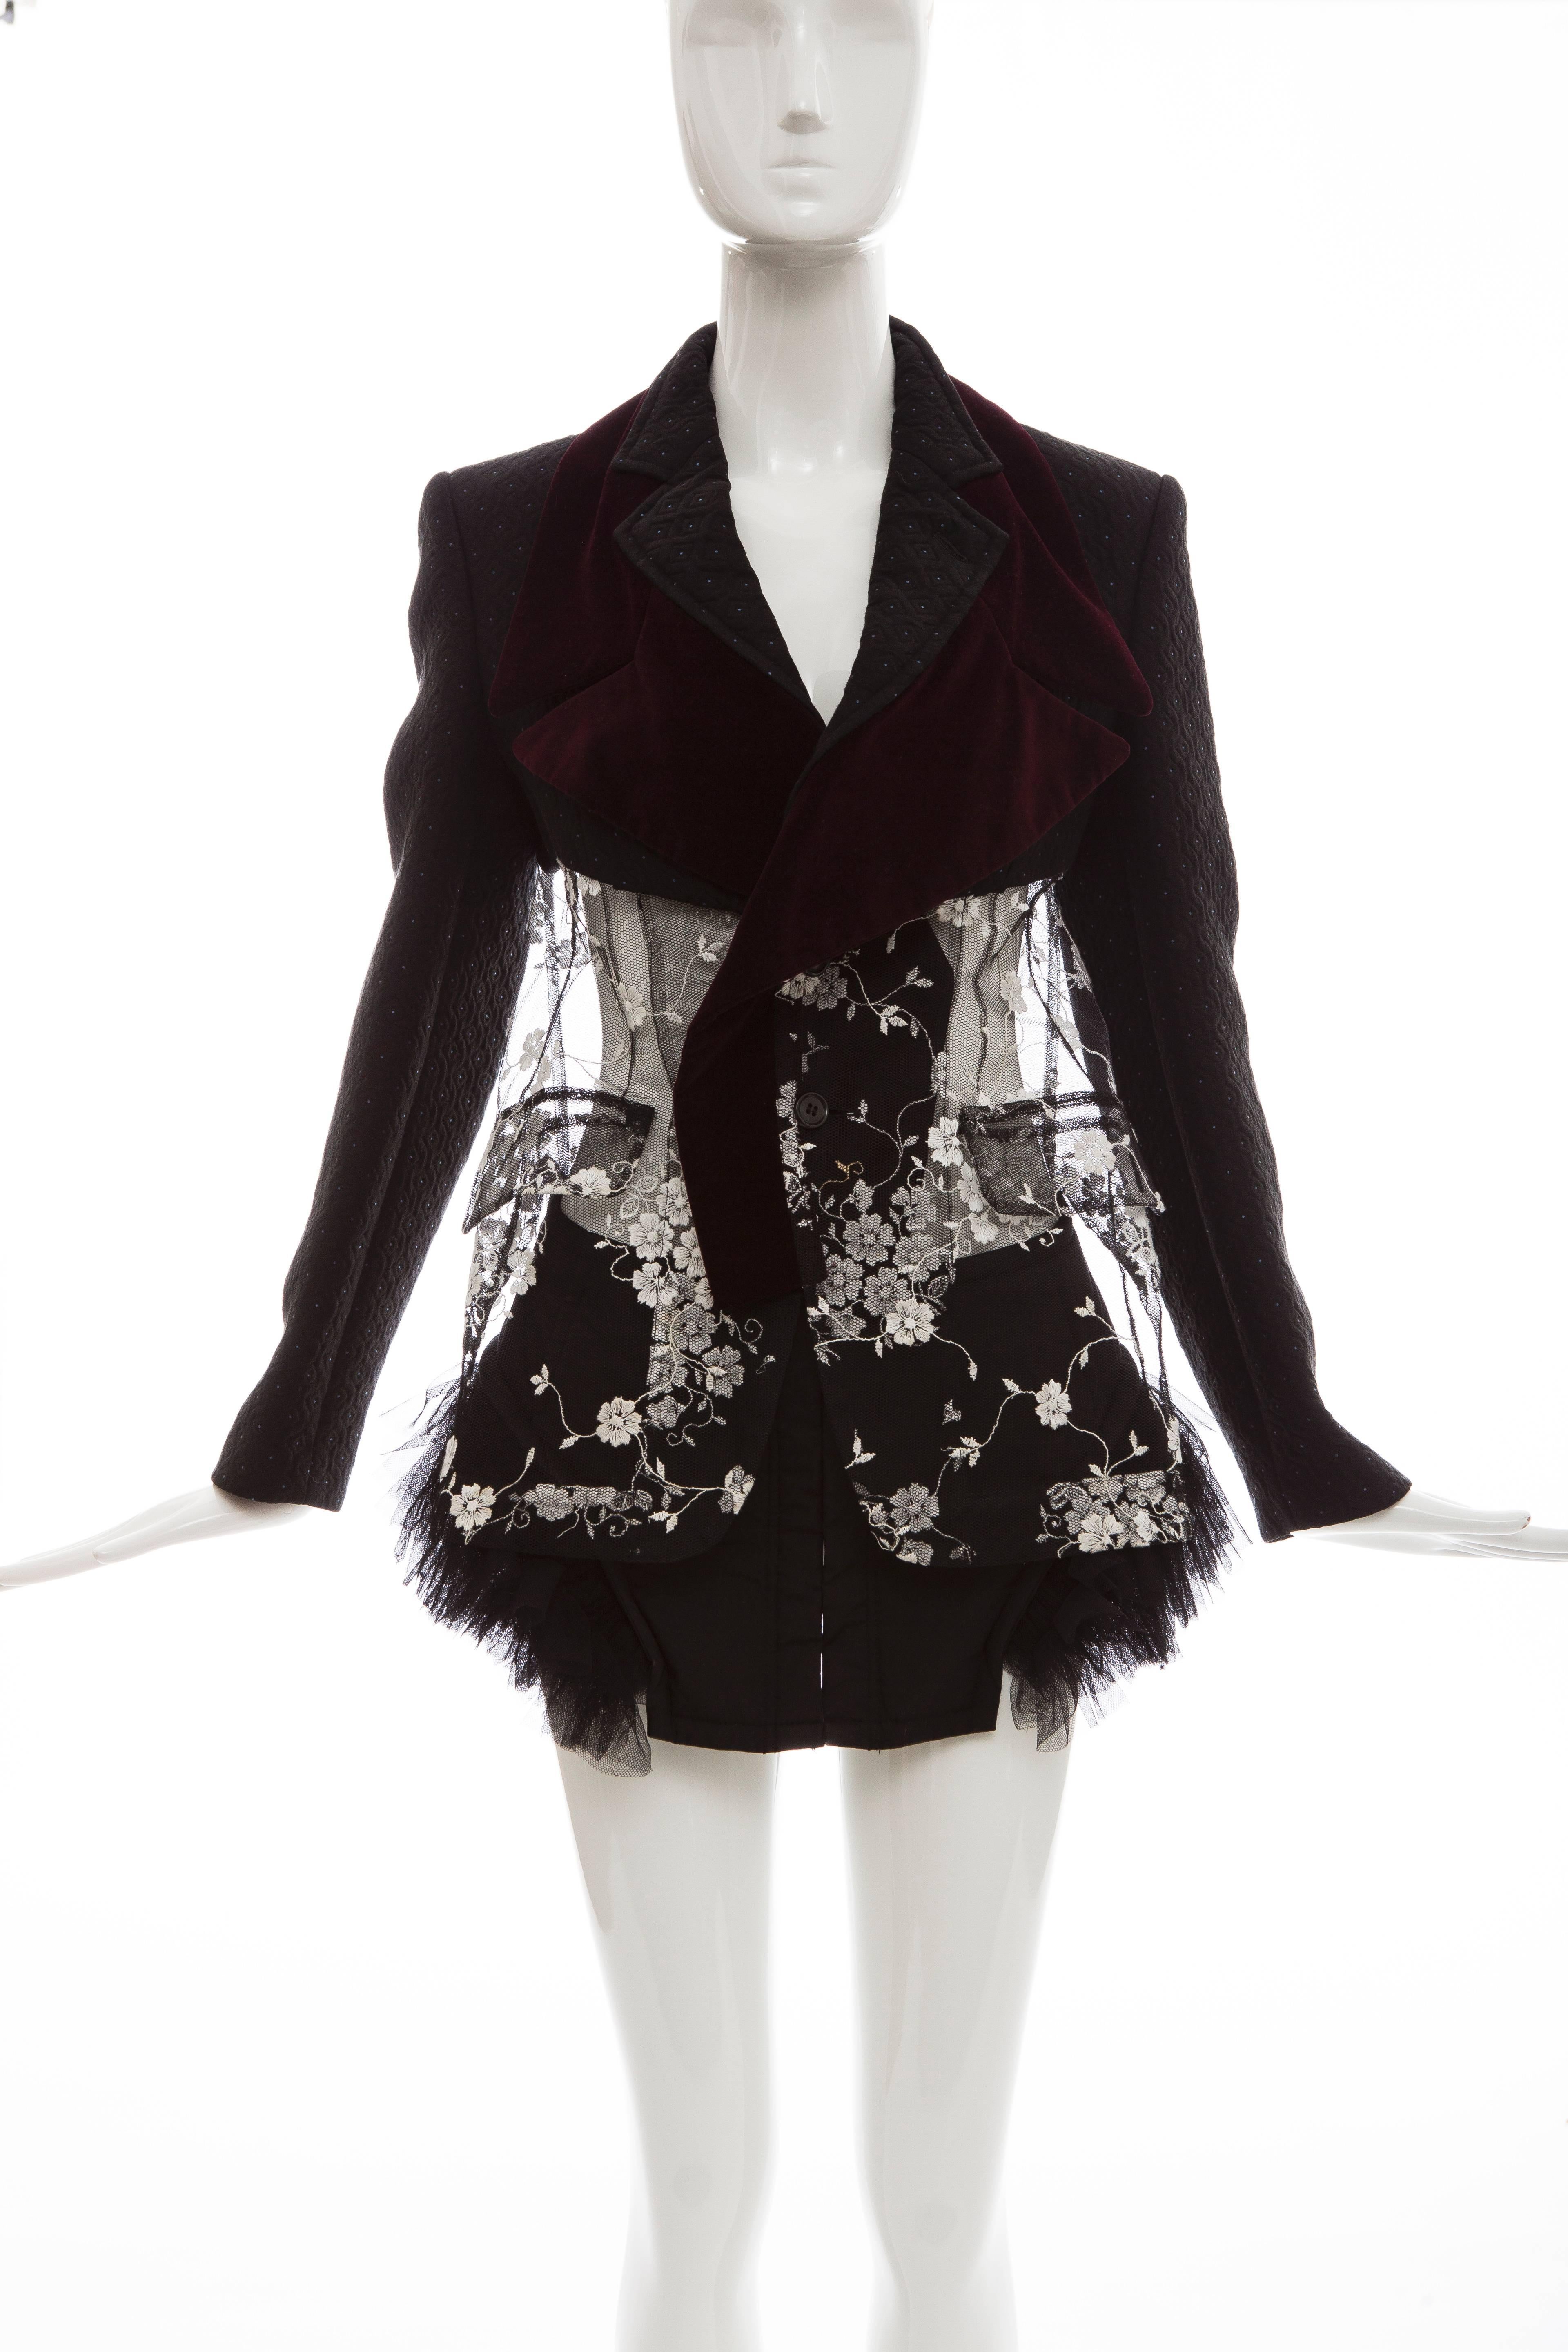 Comme des Garçons, Autumn-Winter 2001,quilted blazer with velvet lapels, embroidered sheer lace bodice, ruffled asymmetrical tulle hem and hook-and-eye button closures at center front. 

Size not listed, estimated from